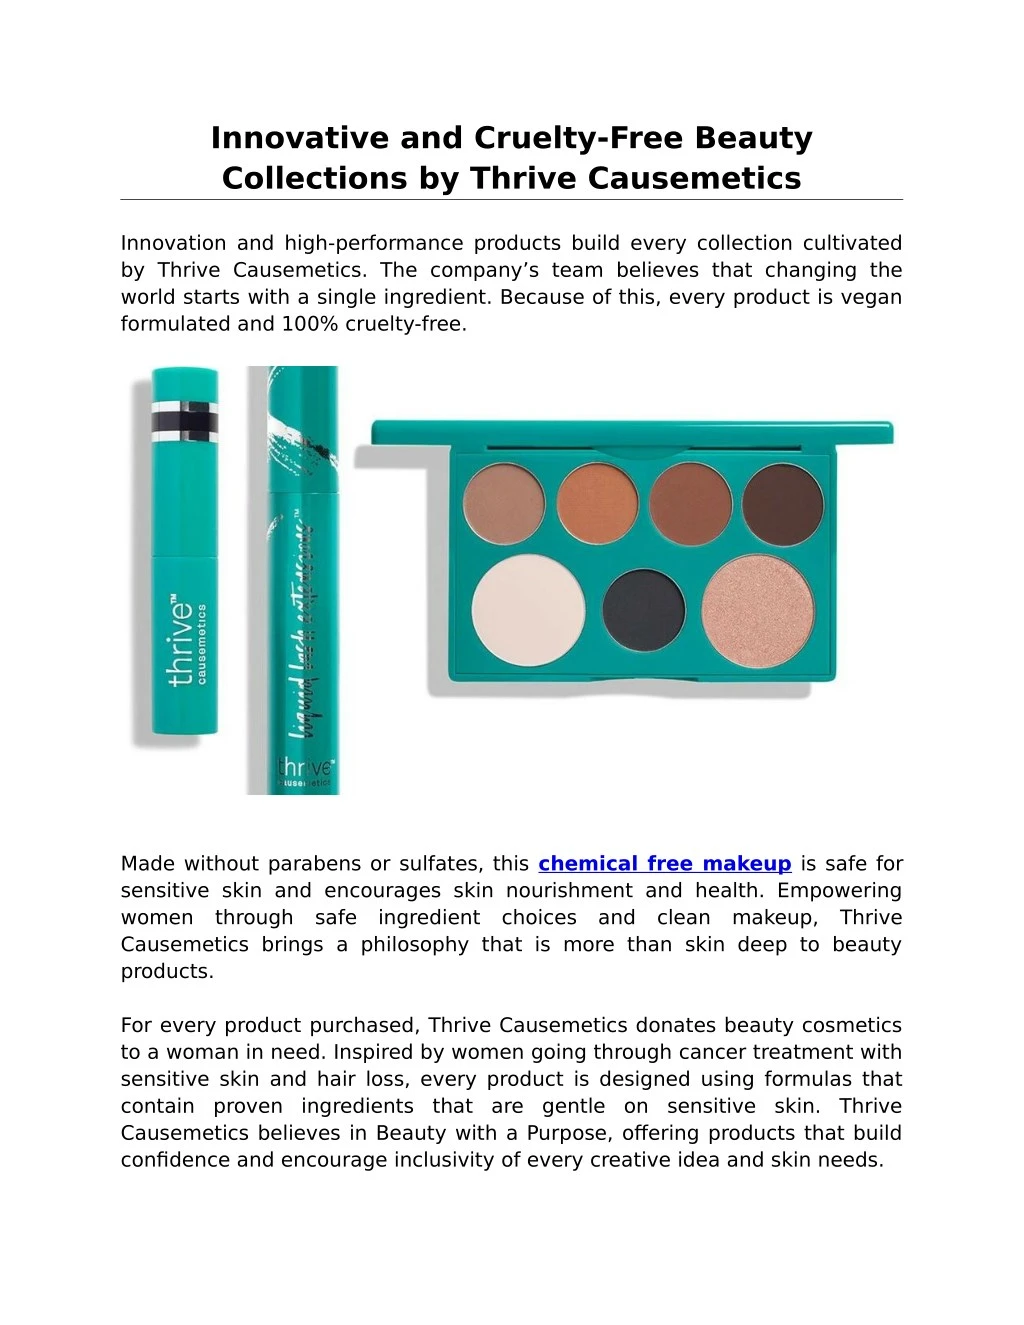 innovative and cruelty free beauty collections